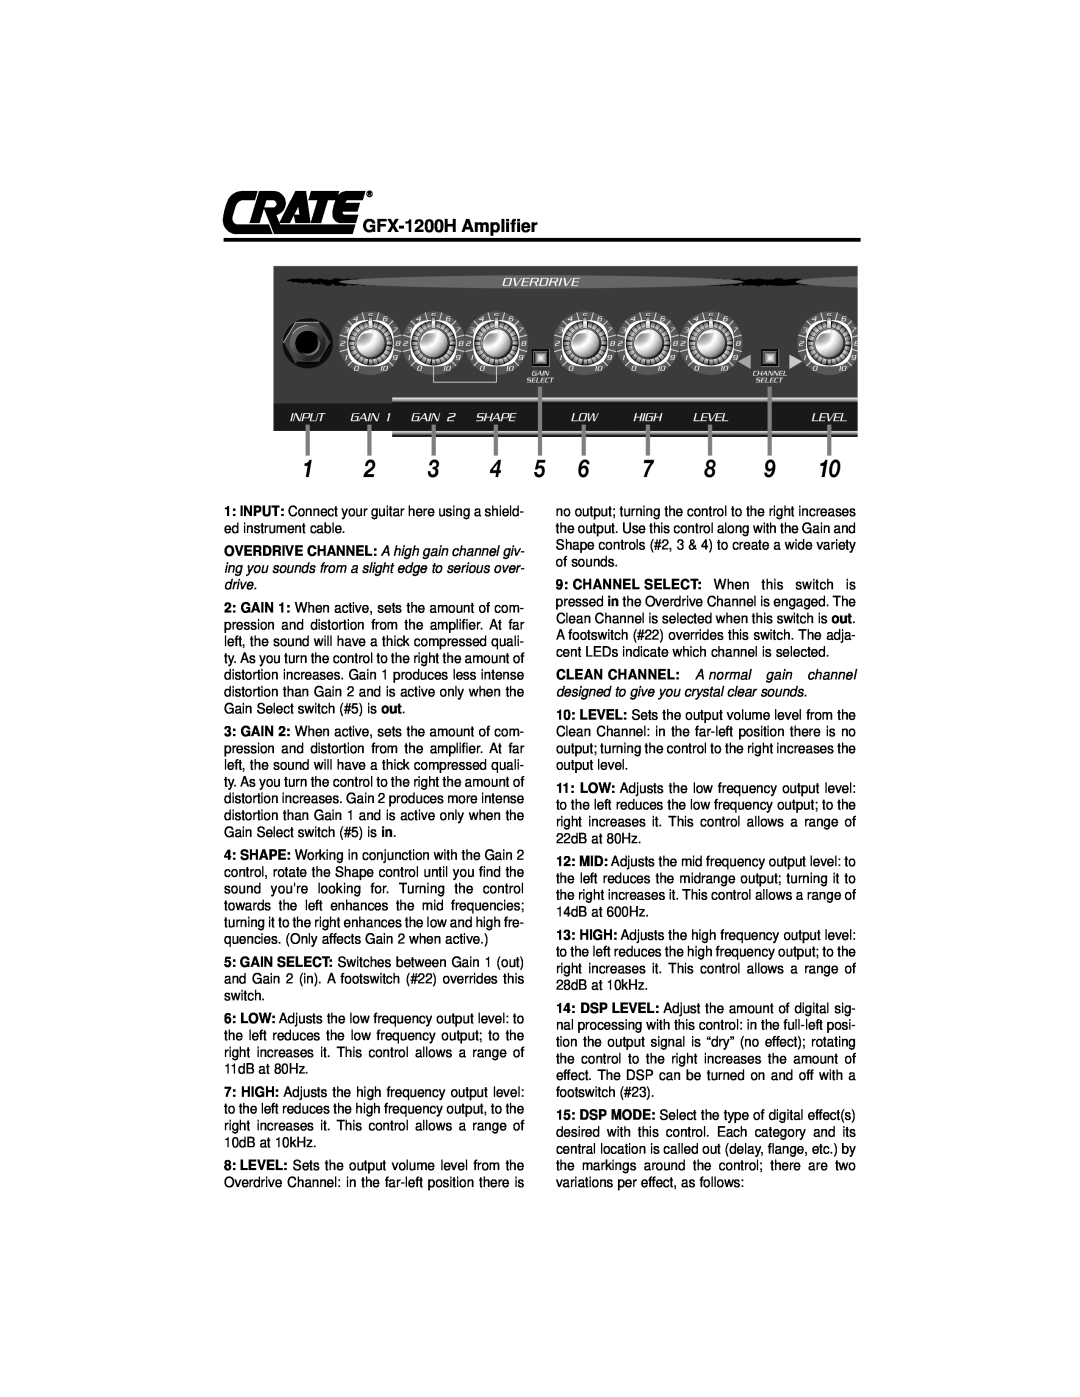 Crate Amplifiers owner manual GFX-1200H Amplifier 